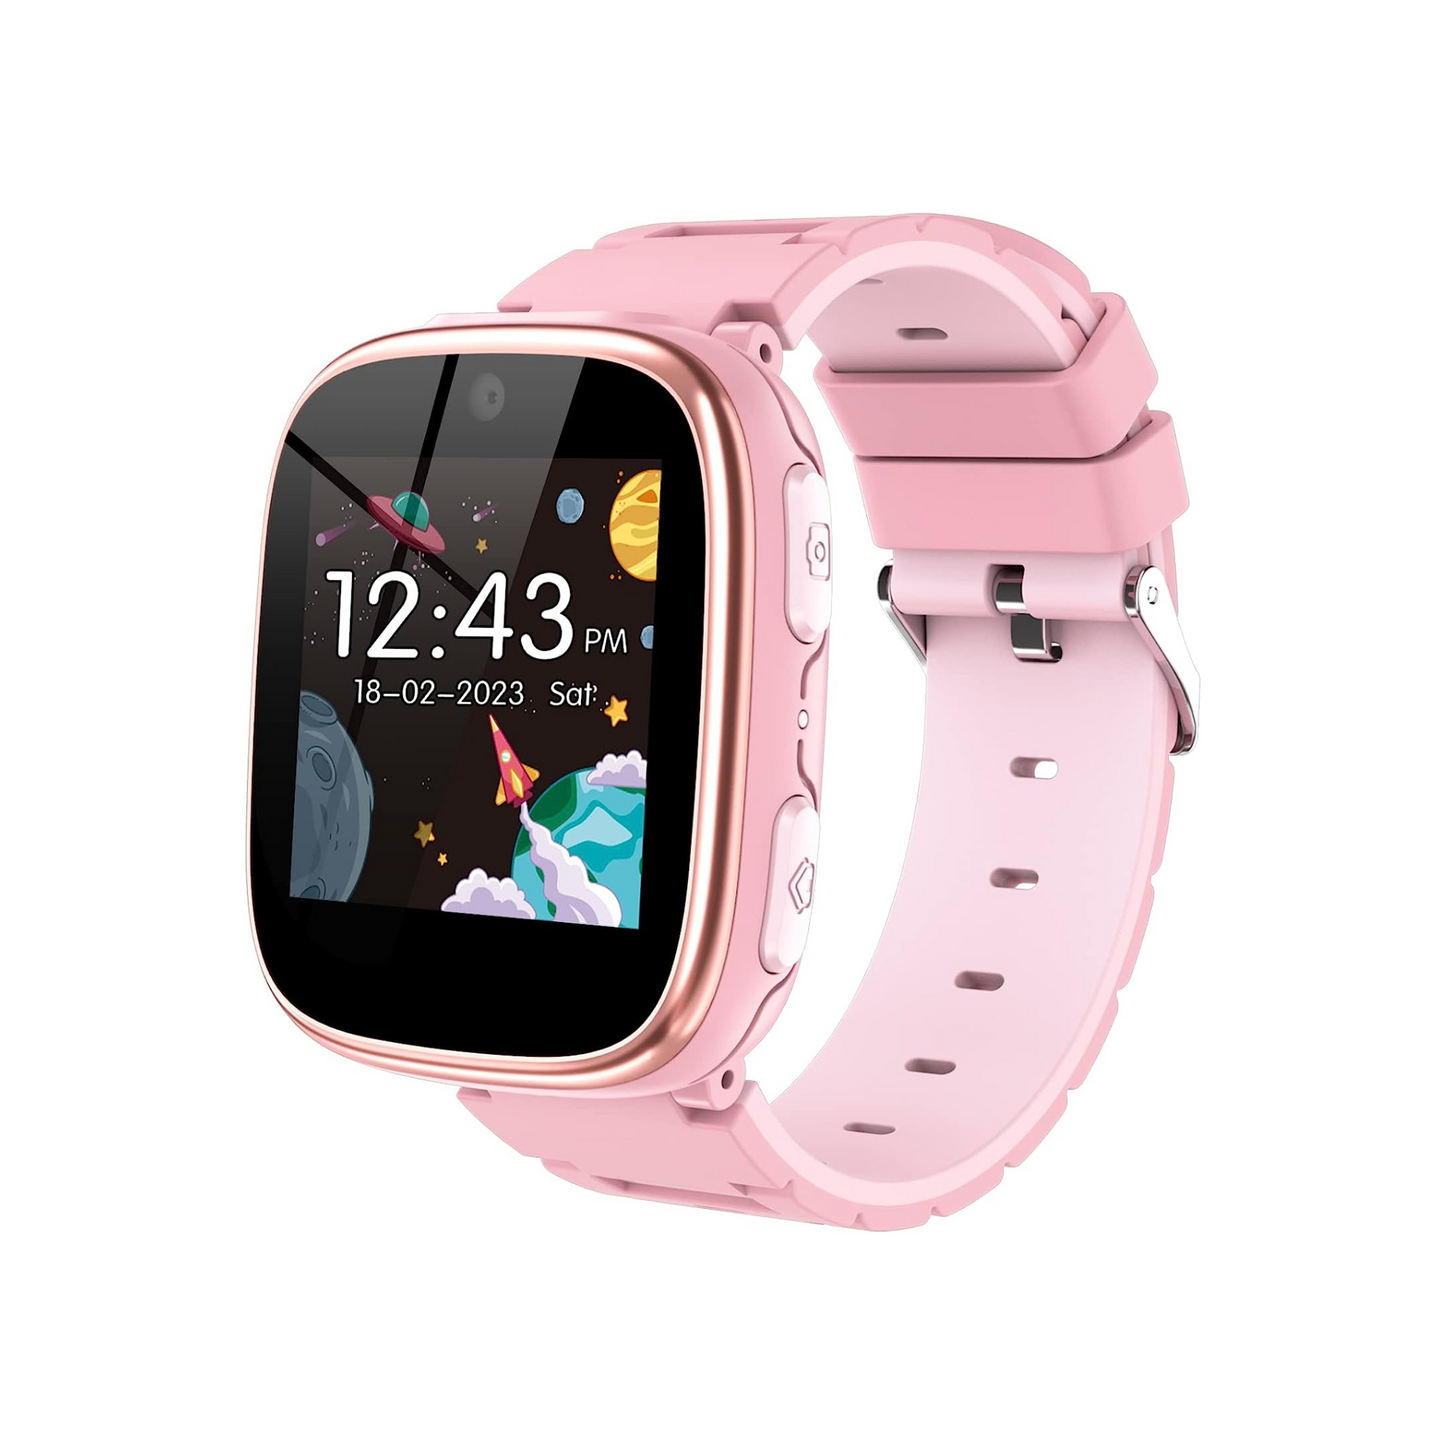 Smart Watch for Kids 4-12 Years Old with 1.54" Touch Screen, 15 Games, best for Birthday Gift (Pink)